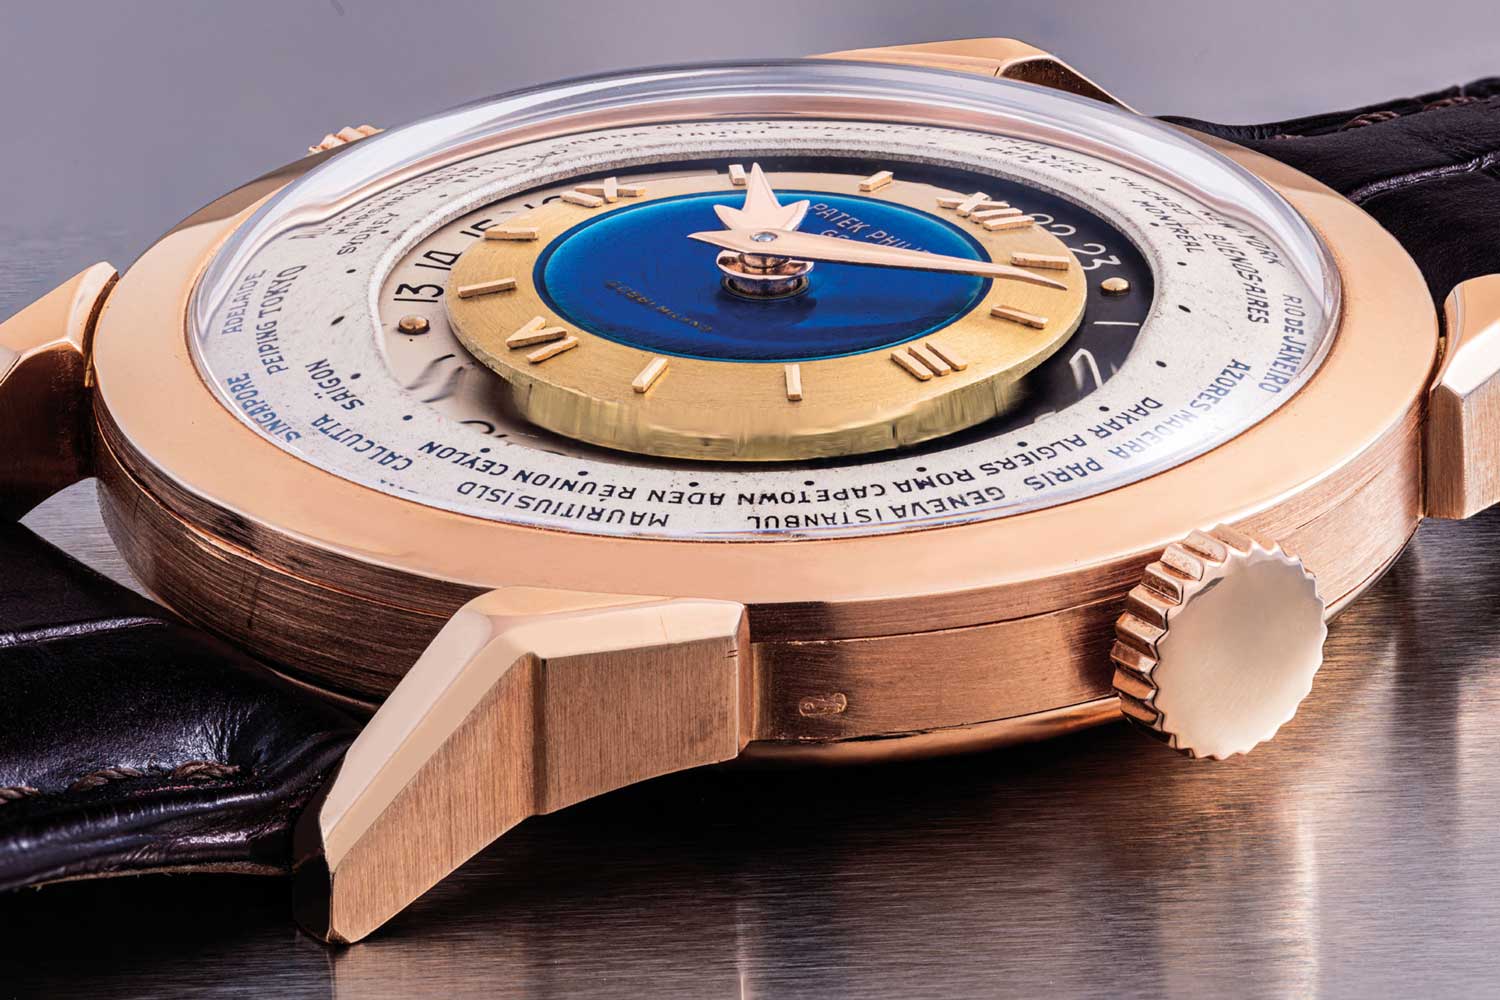 This ref. 2523 with a stunning double-signed dial with blue enamel at the center was sold by Christie’s in 2019 for a staggering USD 9 million. (Image: Christie’s)